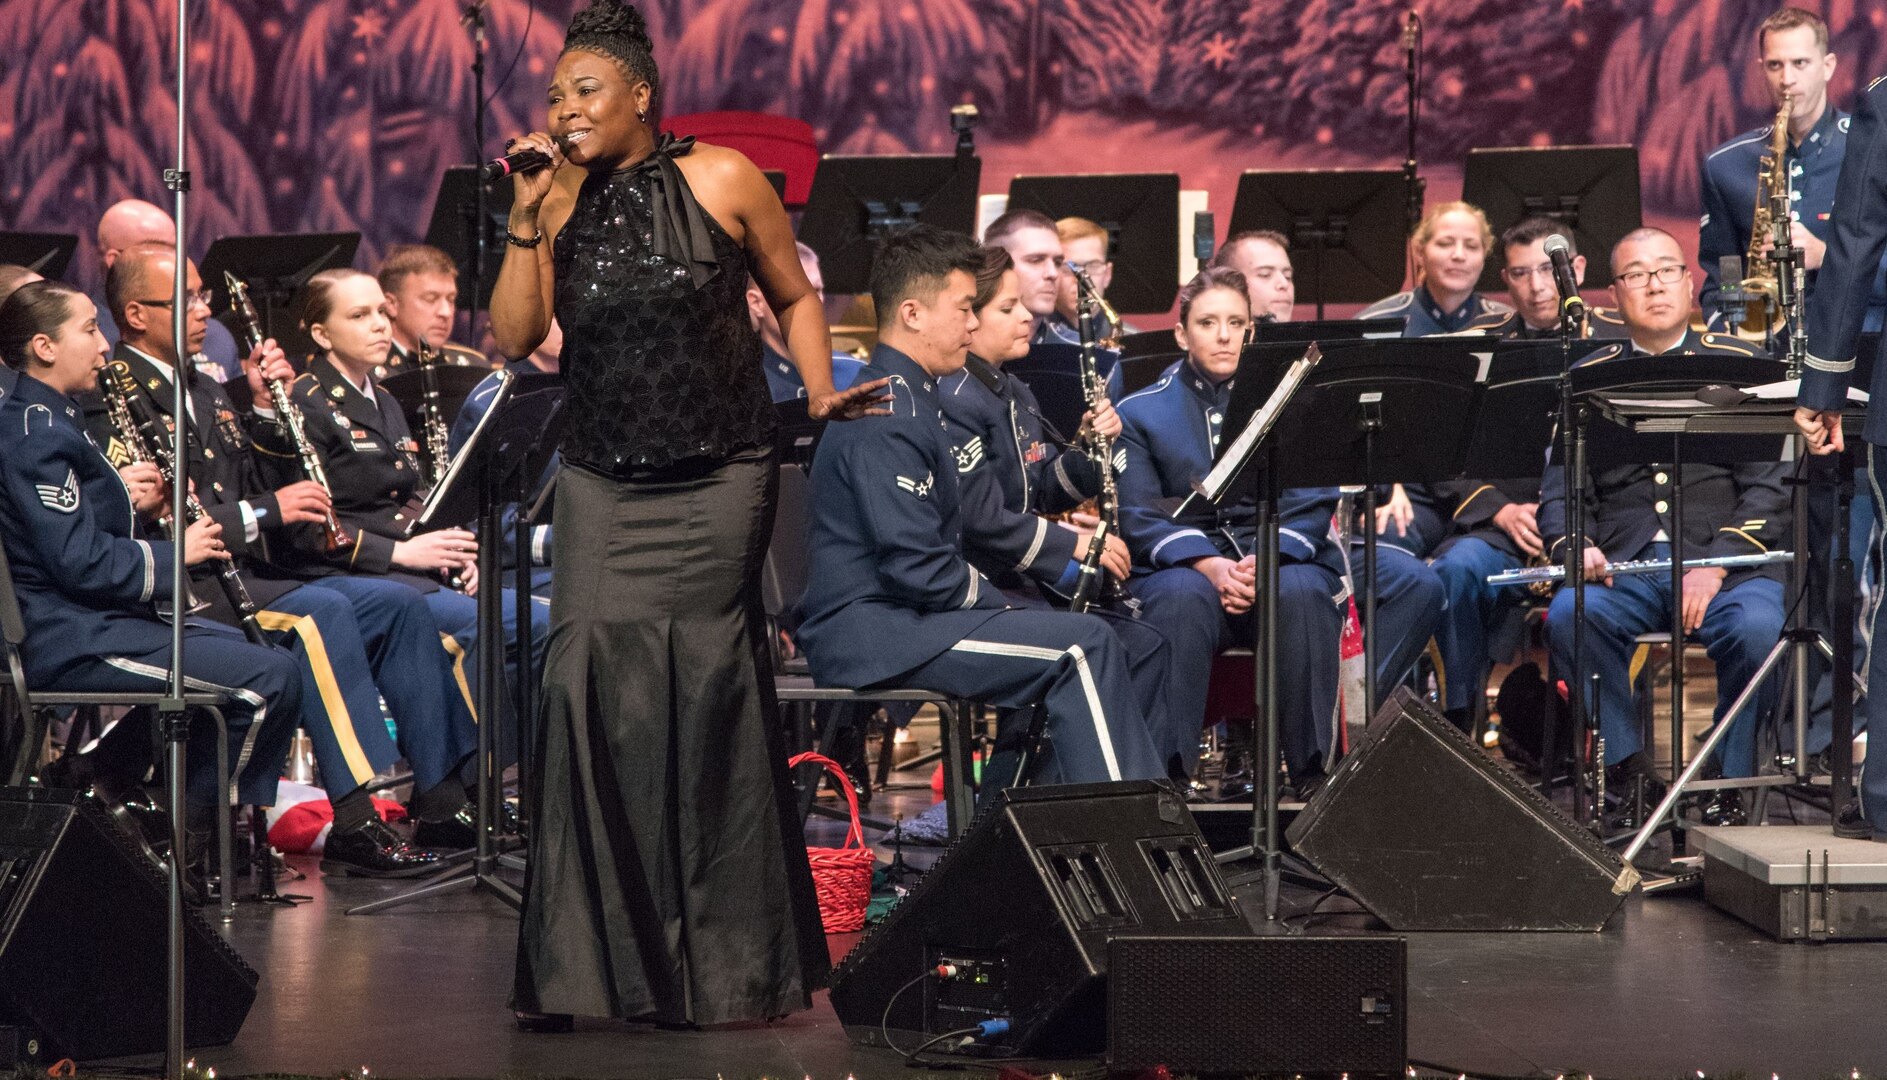 The U.S. Air Force Band of the West and the 323rd Army Band "Fort Sam's Own" team up for a "Holiday in Red, White and Blue" concert Dec. 10, 2017 at the Edgewood Performing Arts Center, 402 Lance St., in San Antonio. The annual performance is free and open to the public and is a holiday tradition.